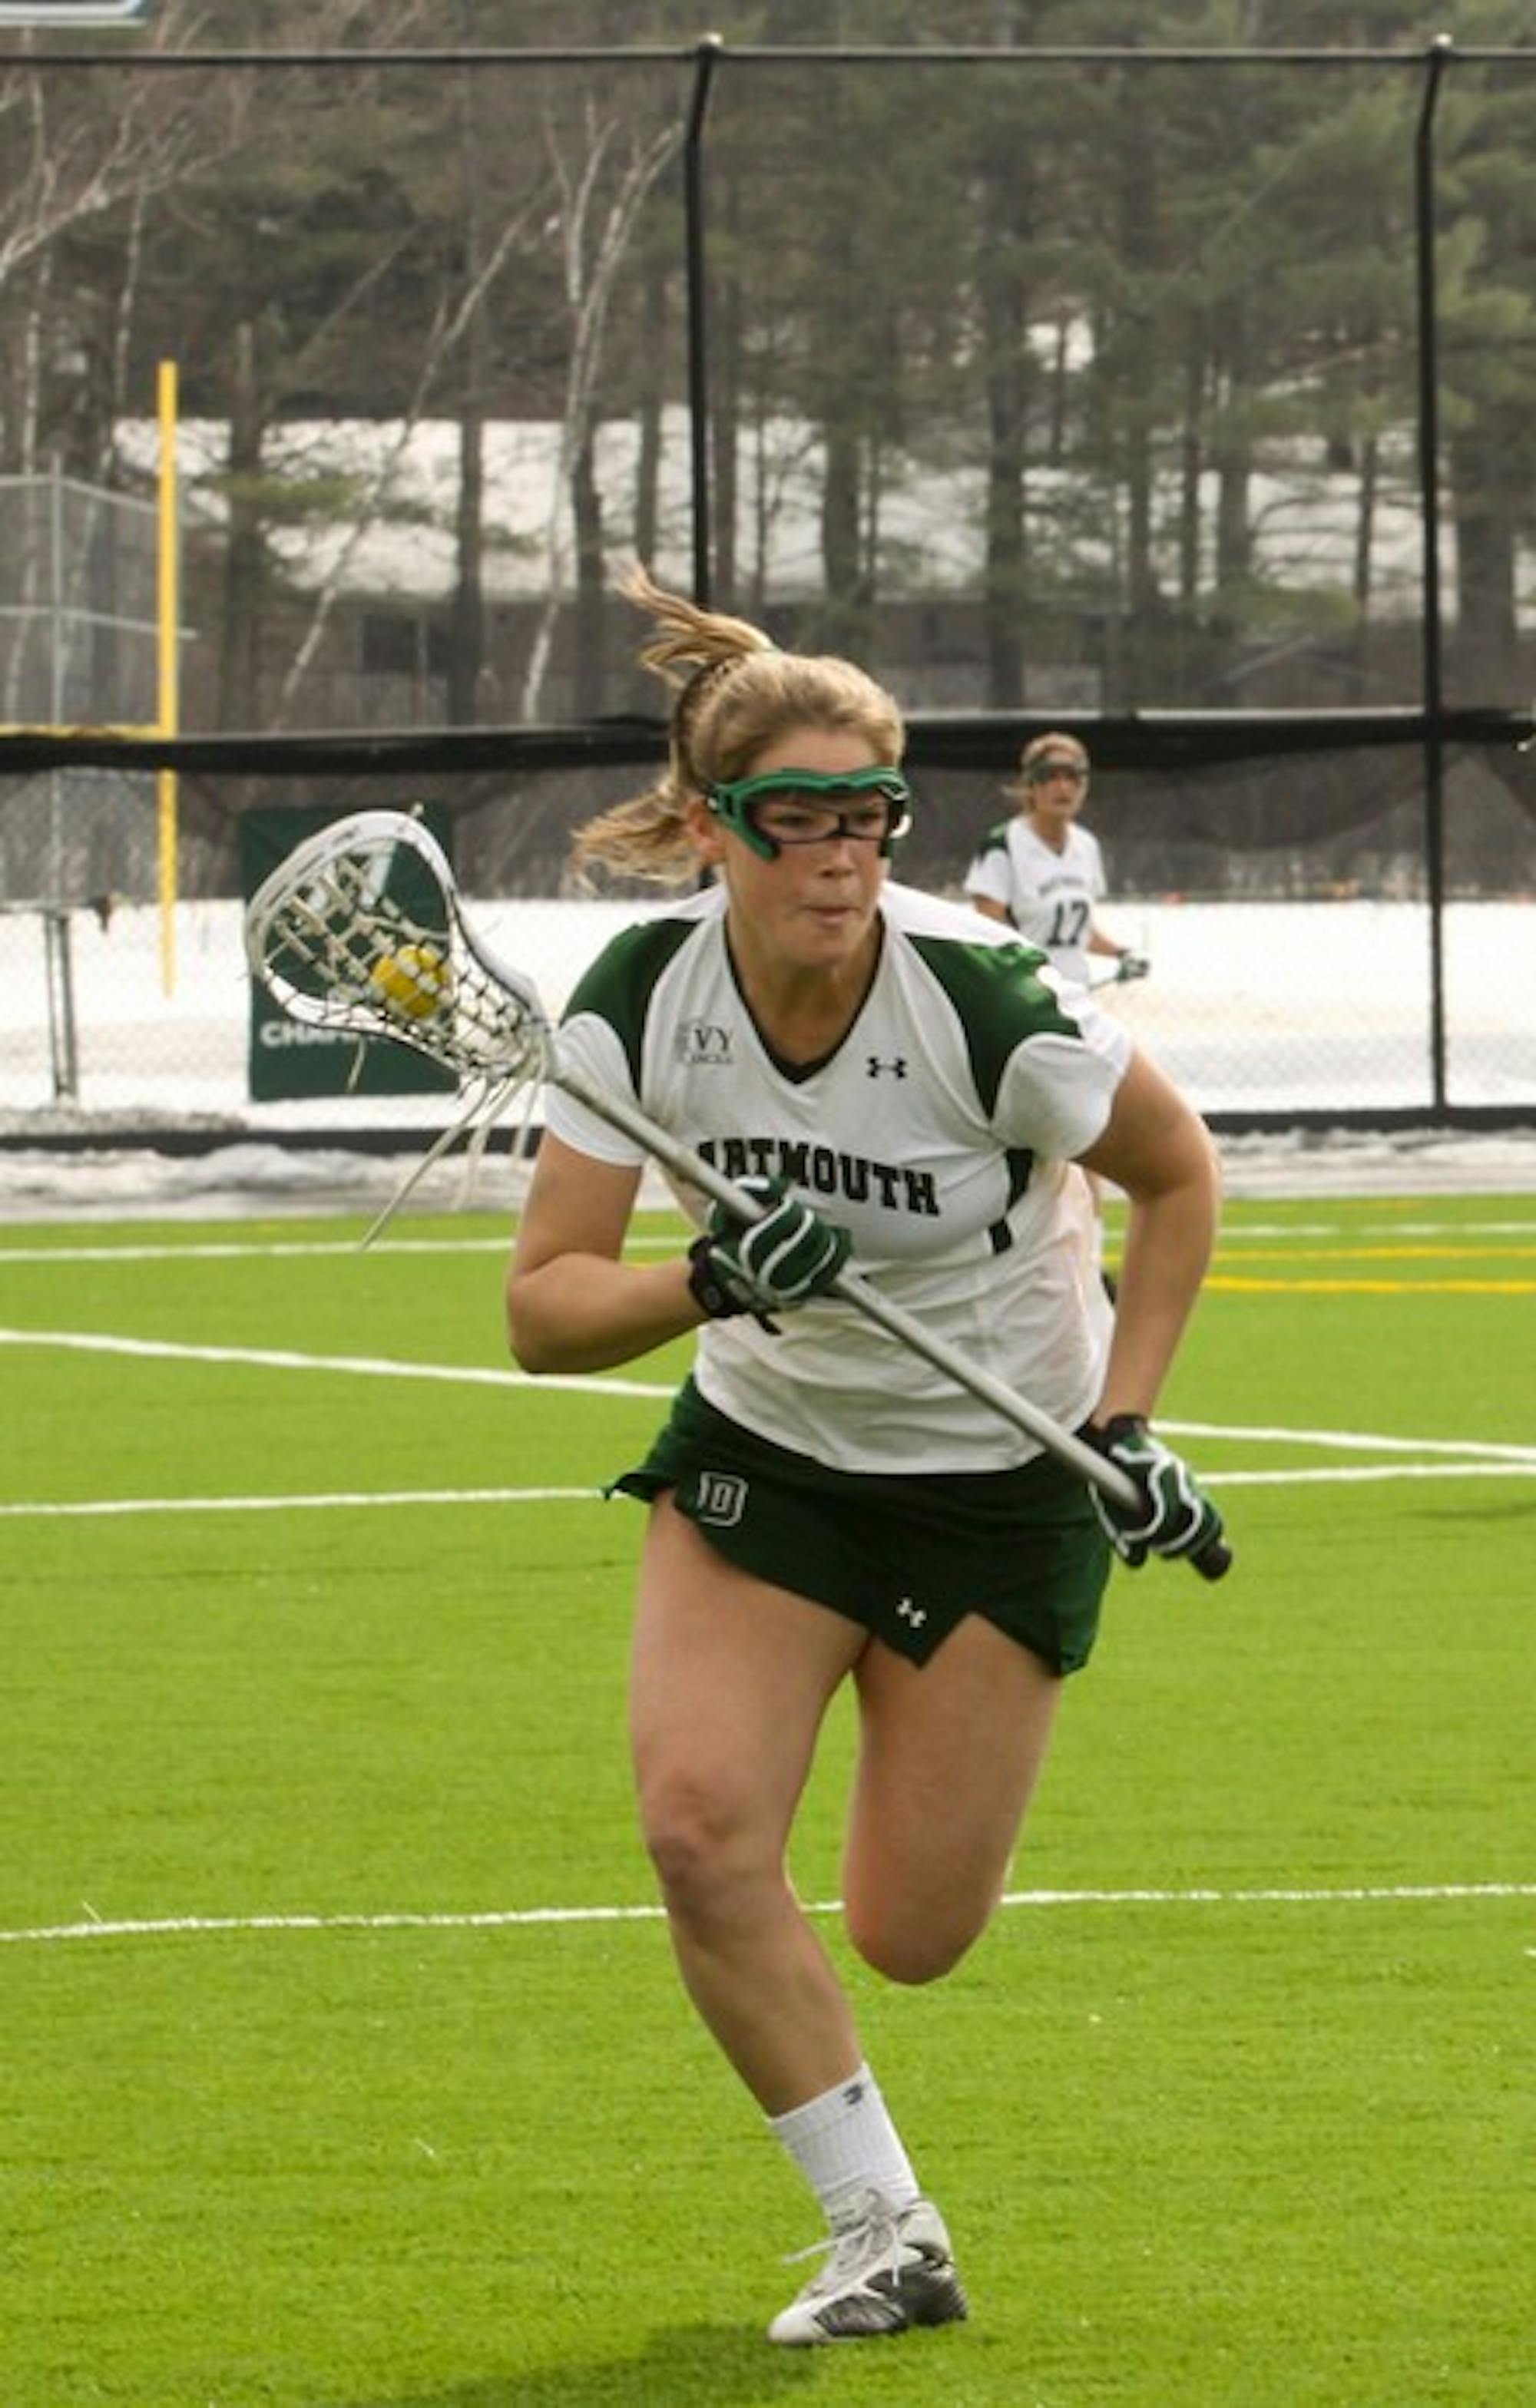 The No. 15 women's lacrosse team is slated to take on No. 19 Cornell on Saturday in Hanover.